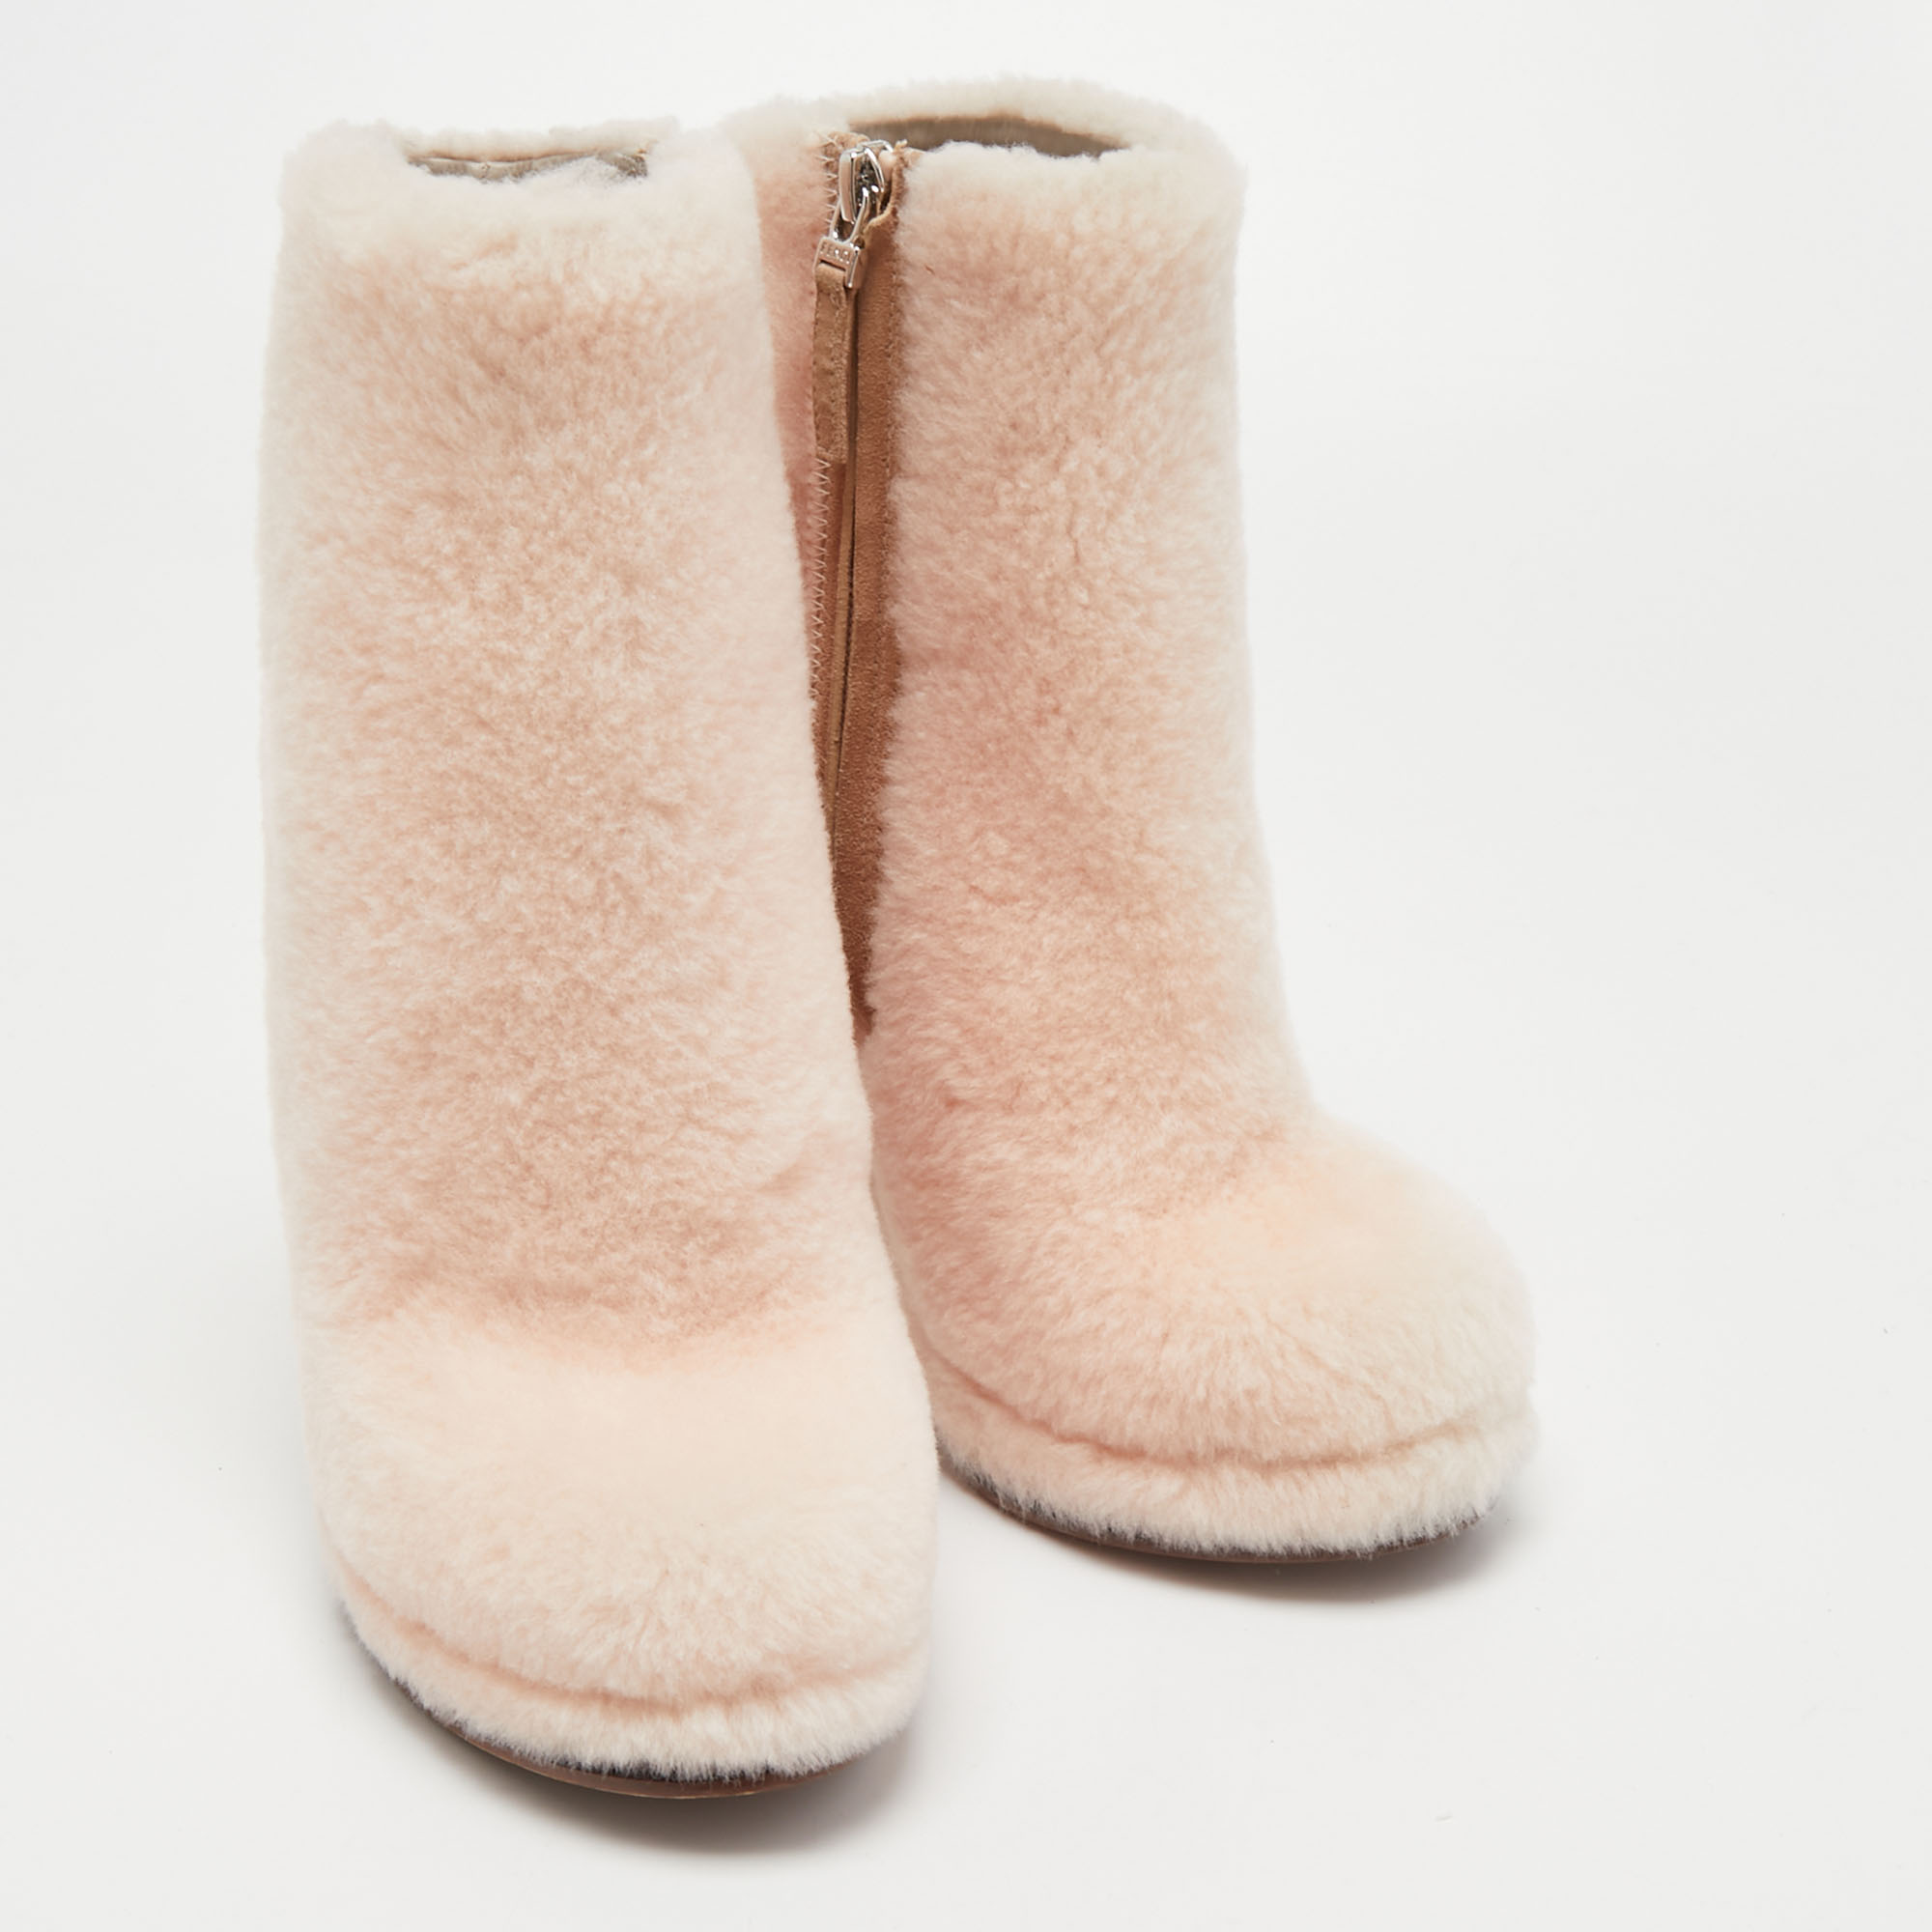 Fendi Light Pink Shearling Ice Heel Ankle Length Boots Size 36